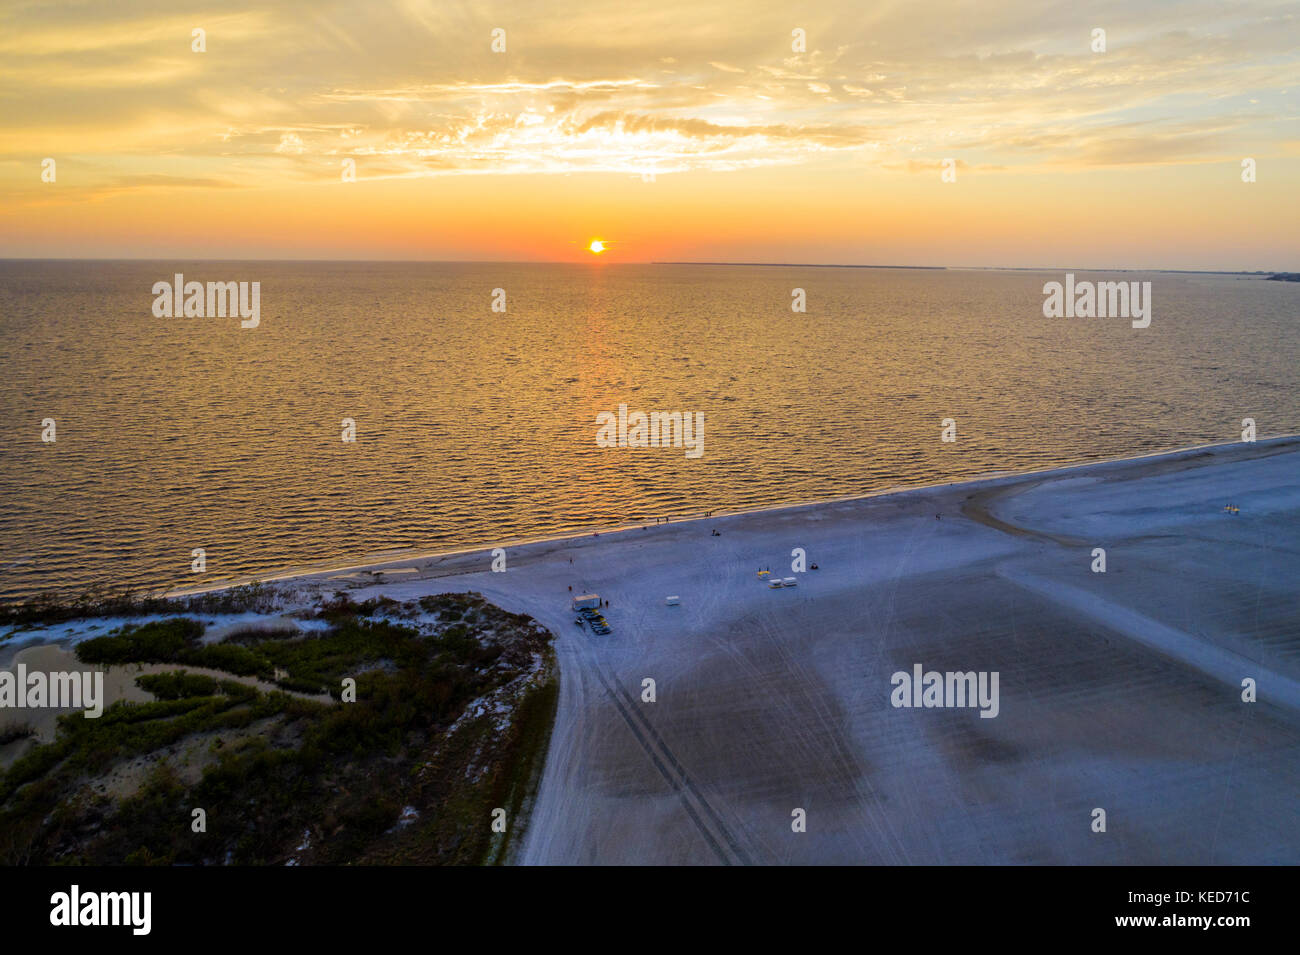 Fort Ft. Myers Beach Florida,Estero Barrier Island,Gulf of Mexico,aerial overhead view,sand,water,sunset,FL17092807d Stock Photo